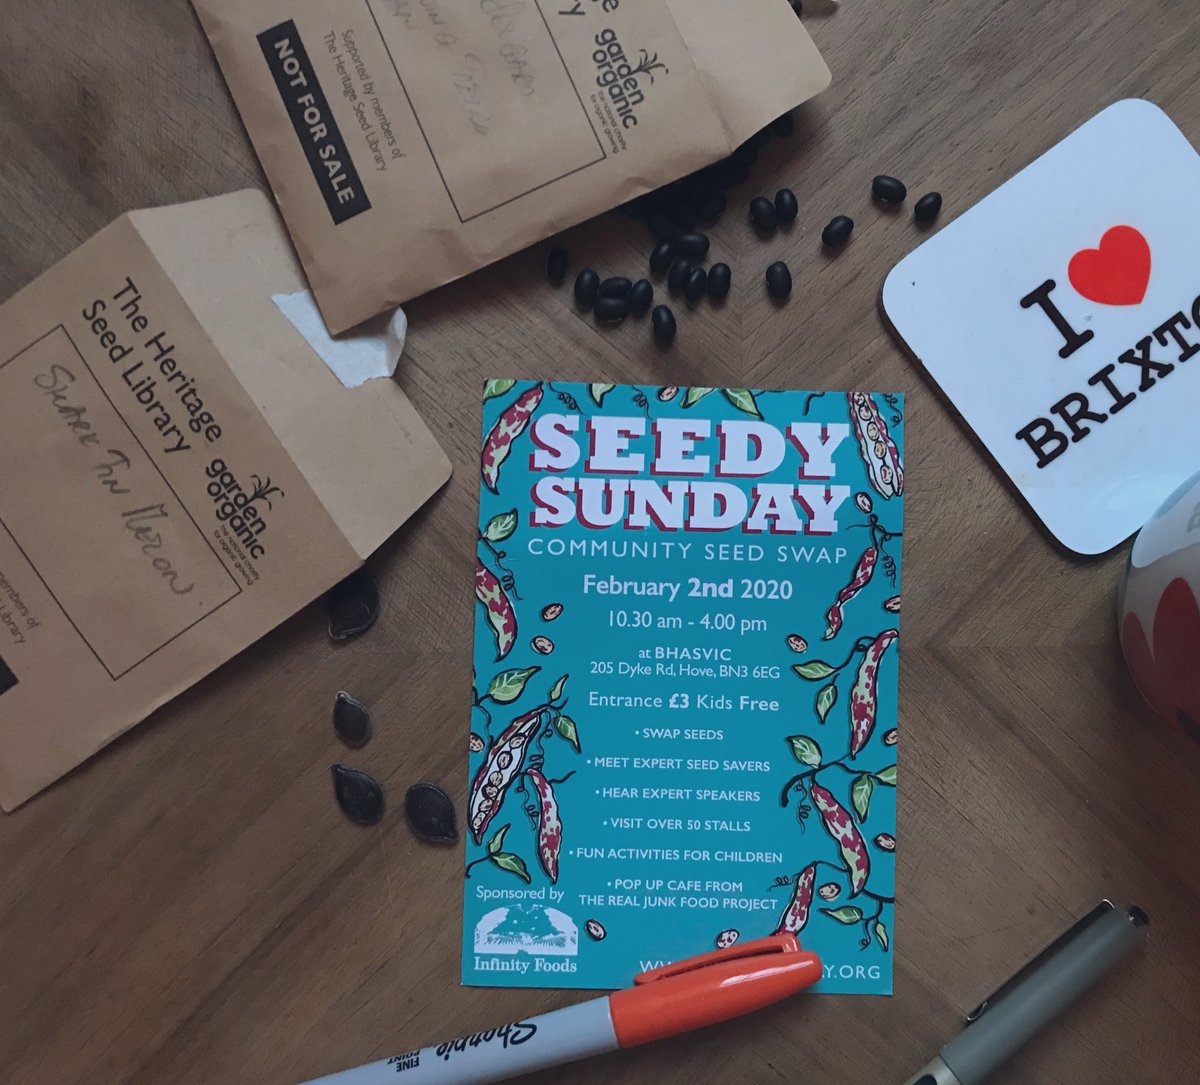 Two days in #Brighton visiting @SSSOSixthForm mate 4 @ONCA_Arts event then @CgnWalworth for #SeedySunday2020 goodies for @PeabodyLDN #Blackfriars & @EdibleEstate garden sessions with #residents & @ArkGlobeAcademy #students  #Land #Food #Art 🚶🏾‍♀️